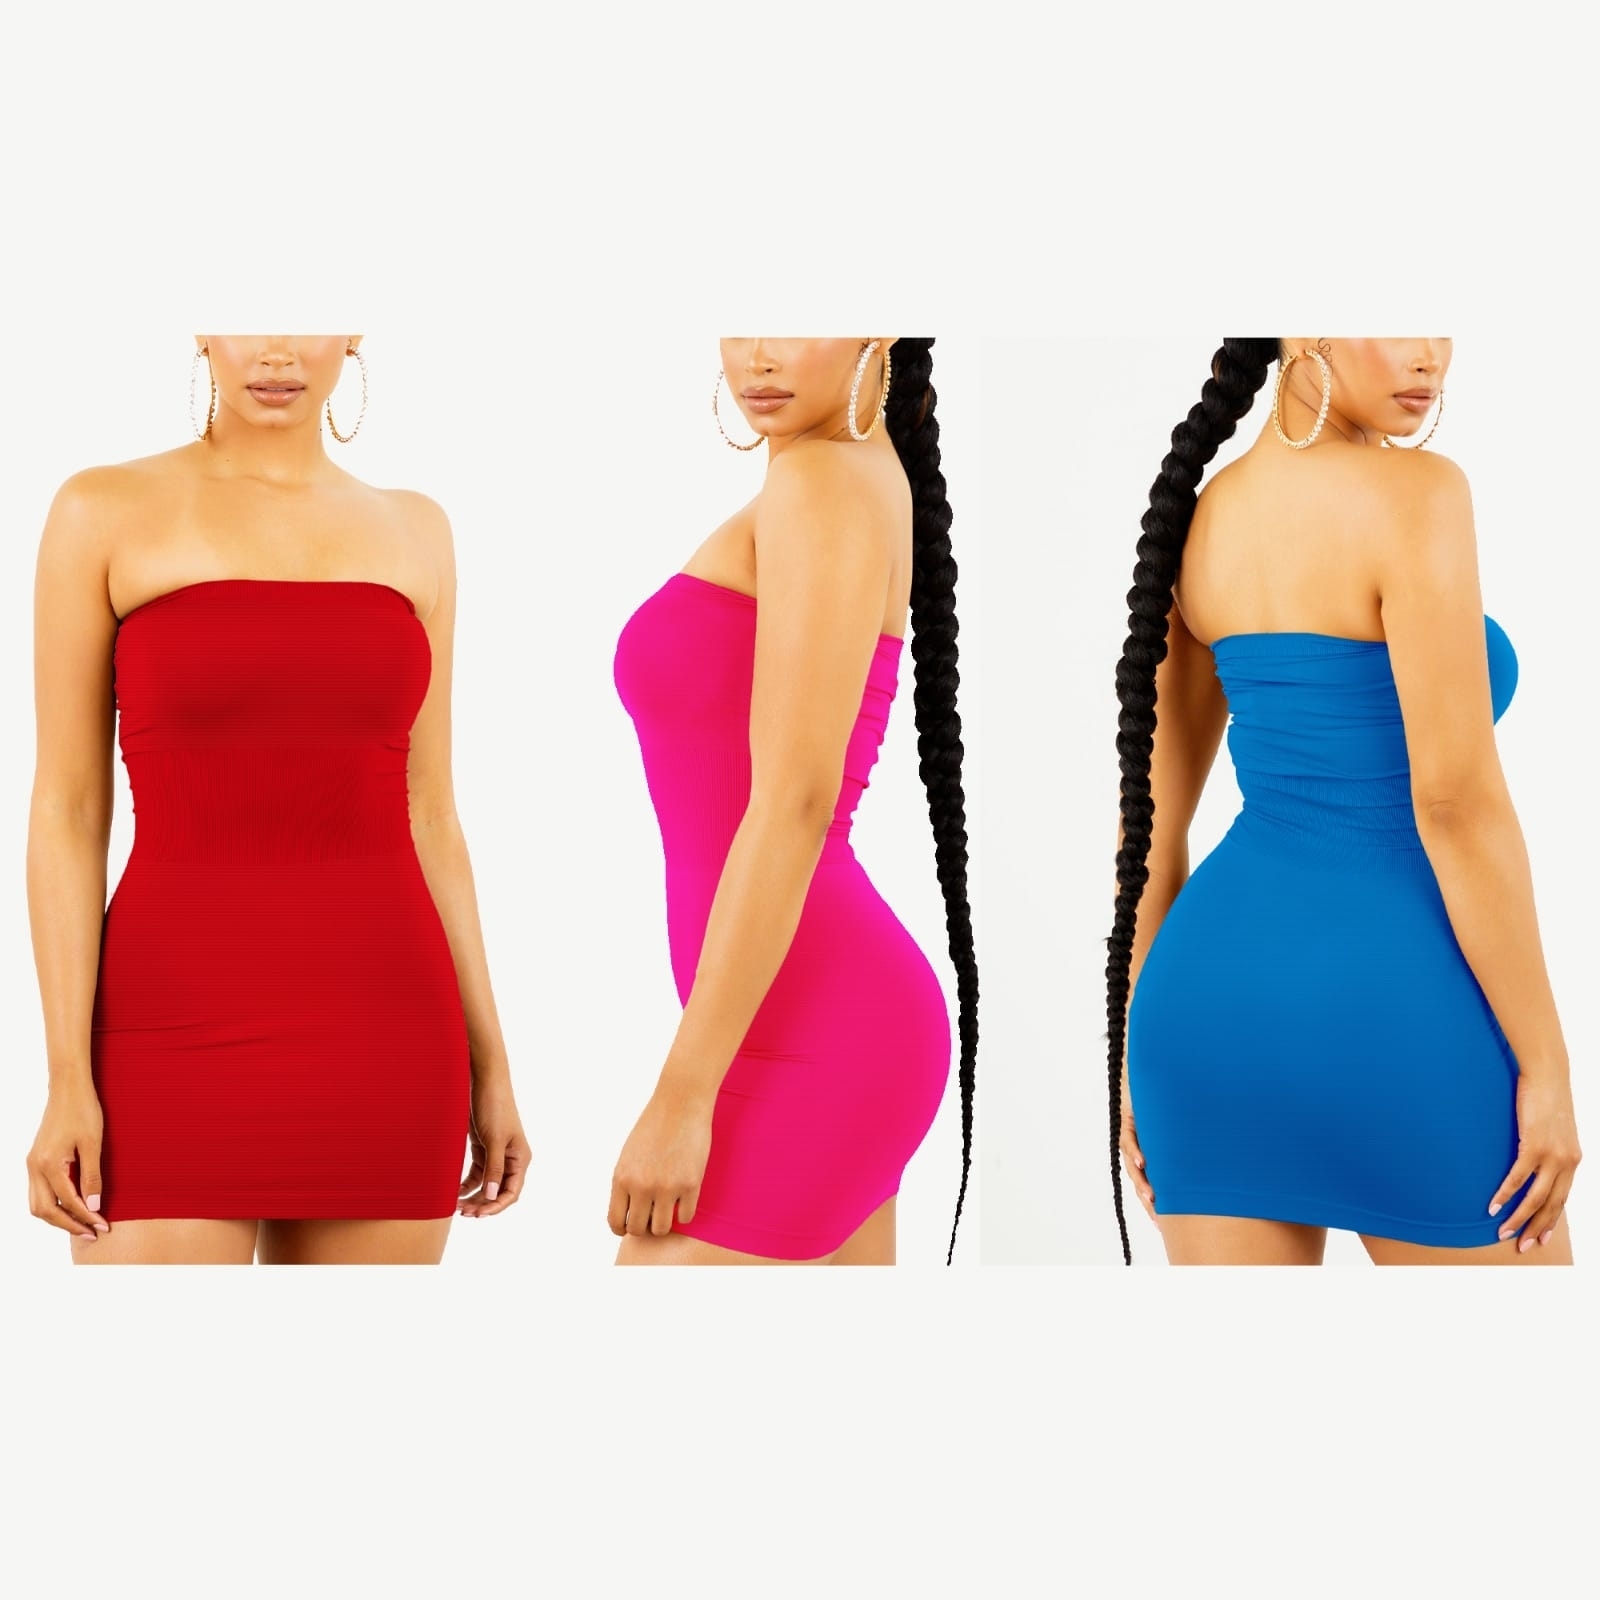 2-Pack Women's Strapless Stretchy Tight Fit Seamless Body Con Mini Tube Top Dress - PINK, XS